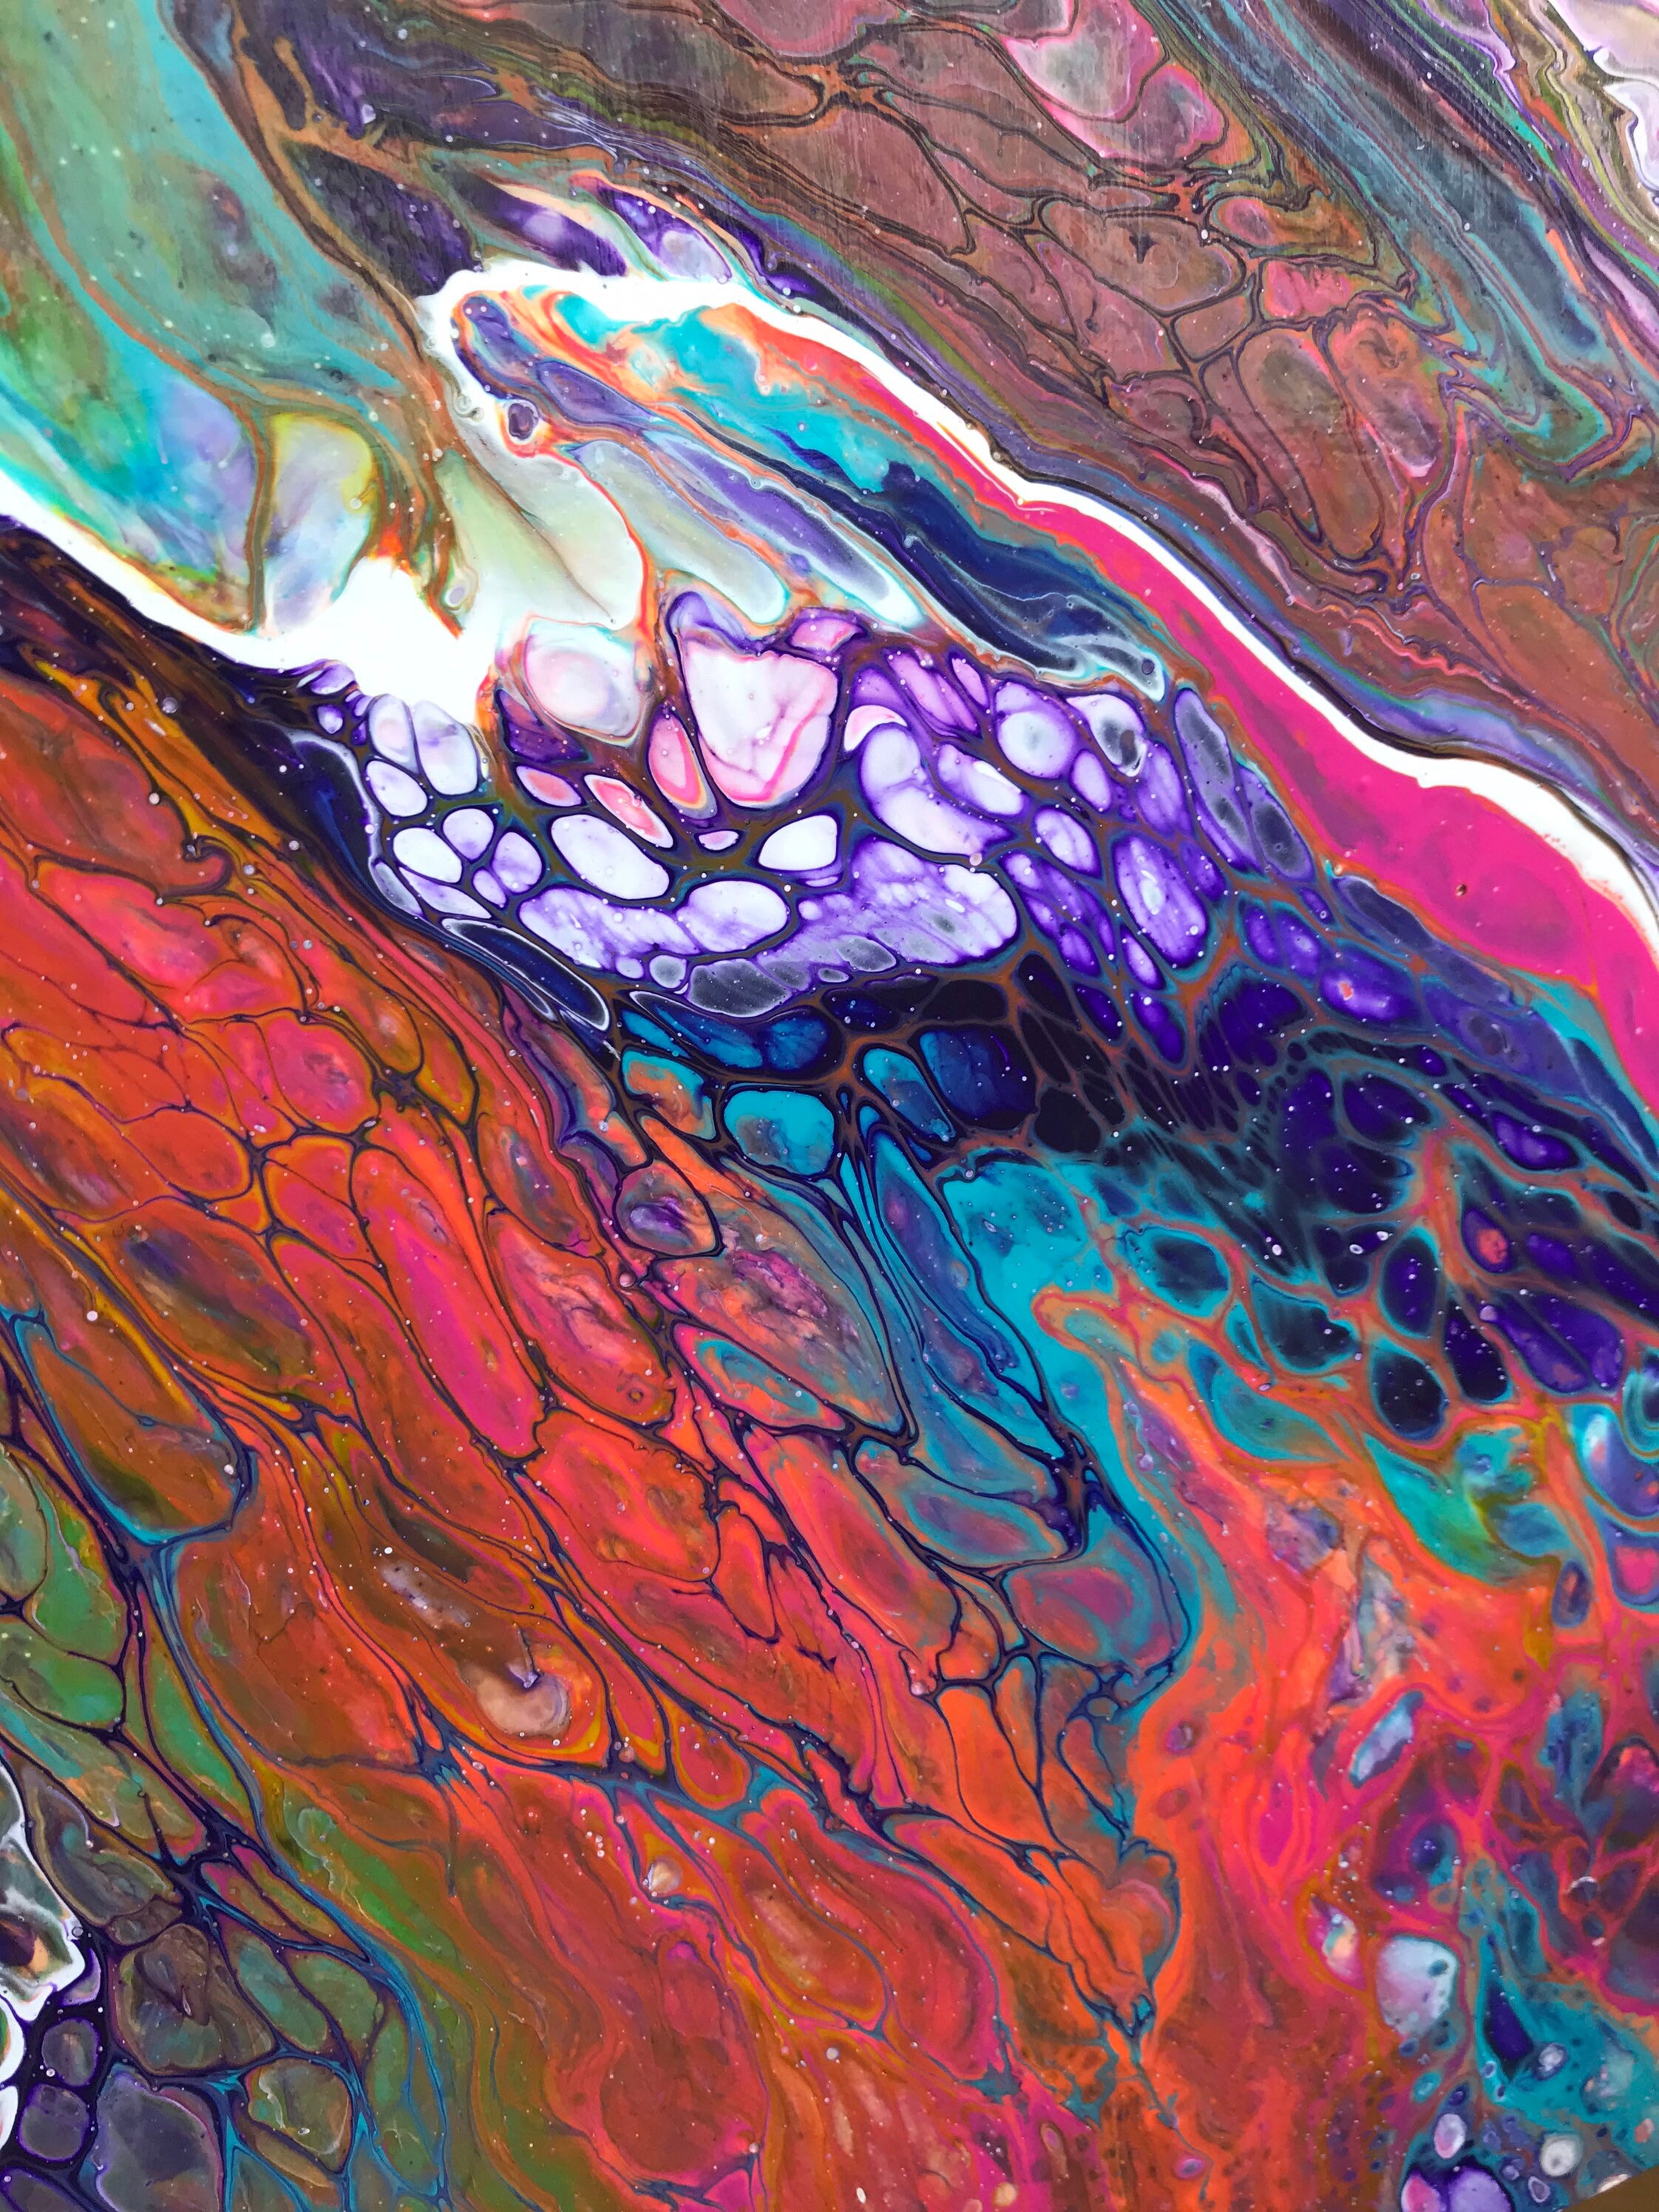 Multi coloured acrylic pour painting on canvas | Etsy